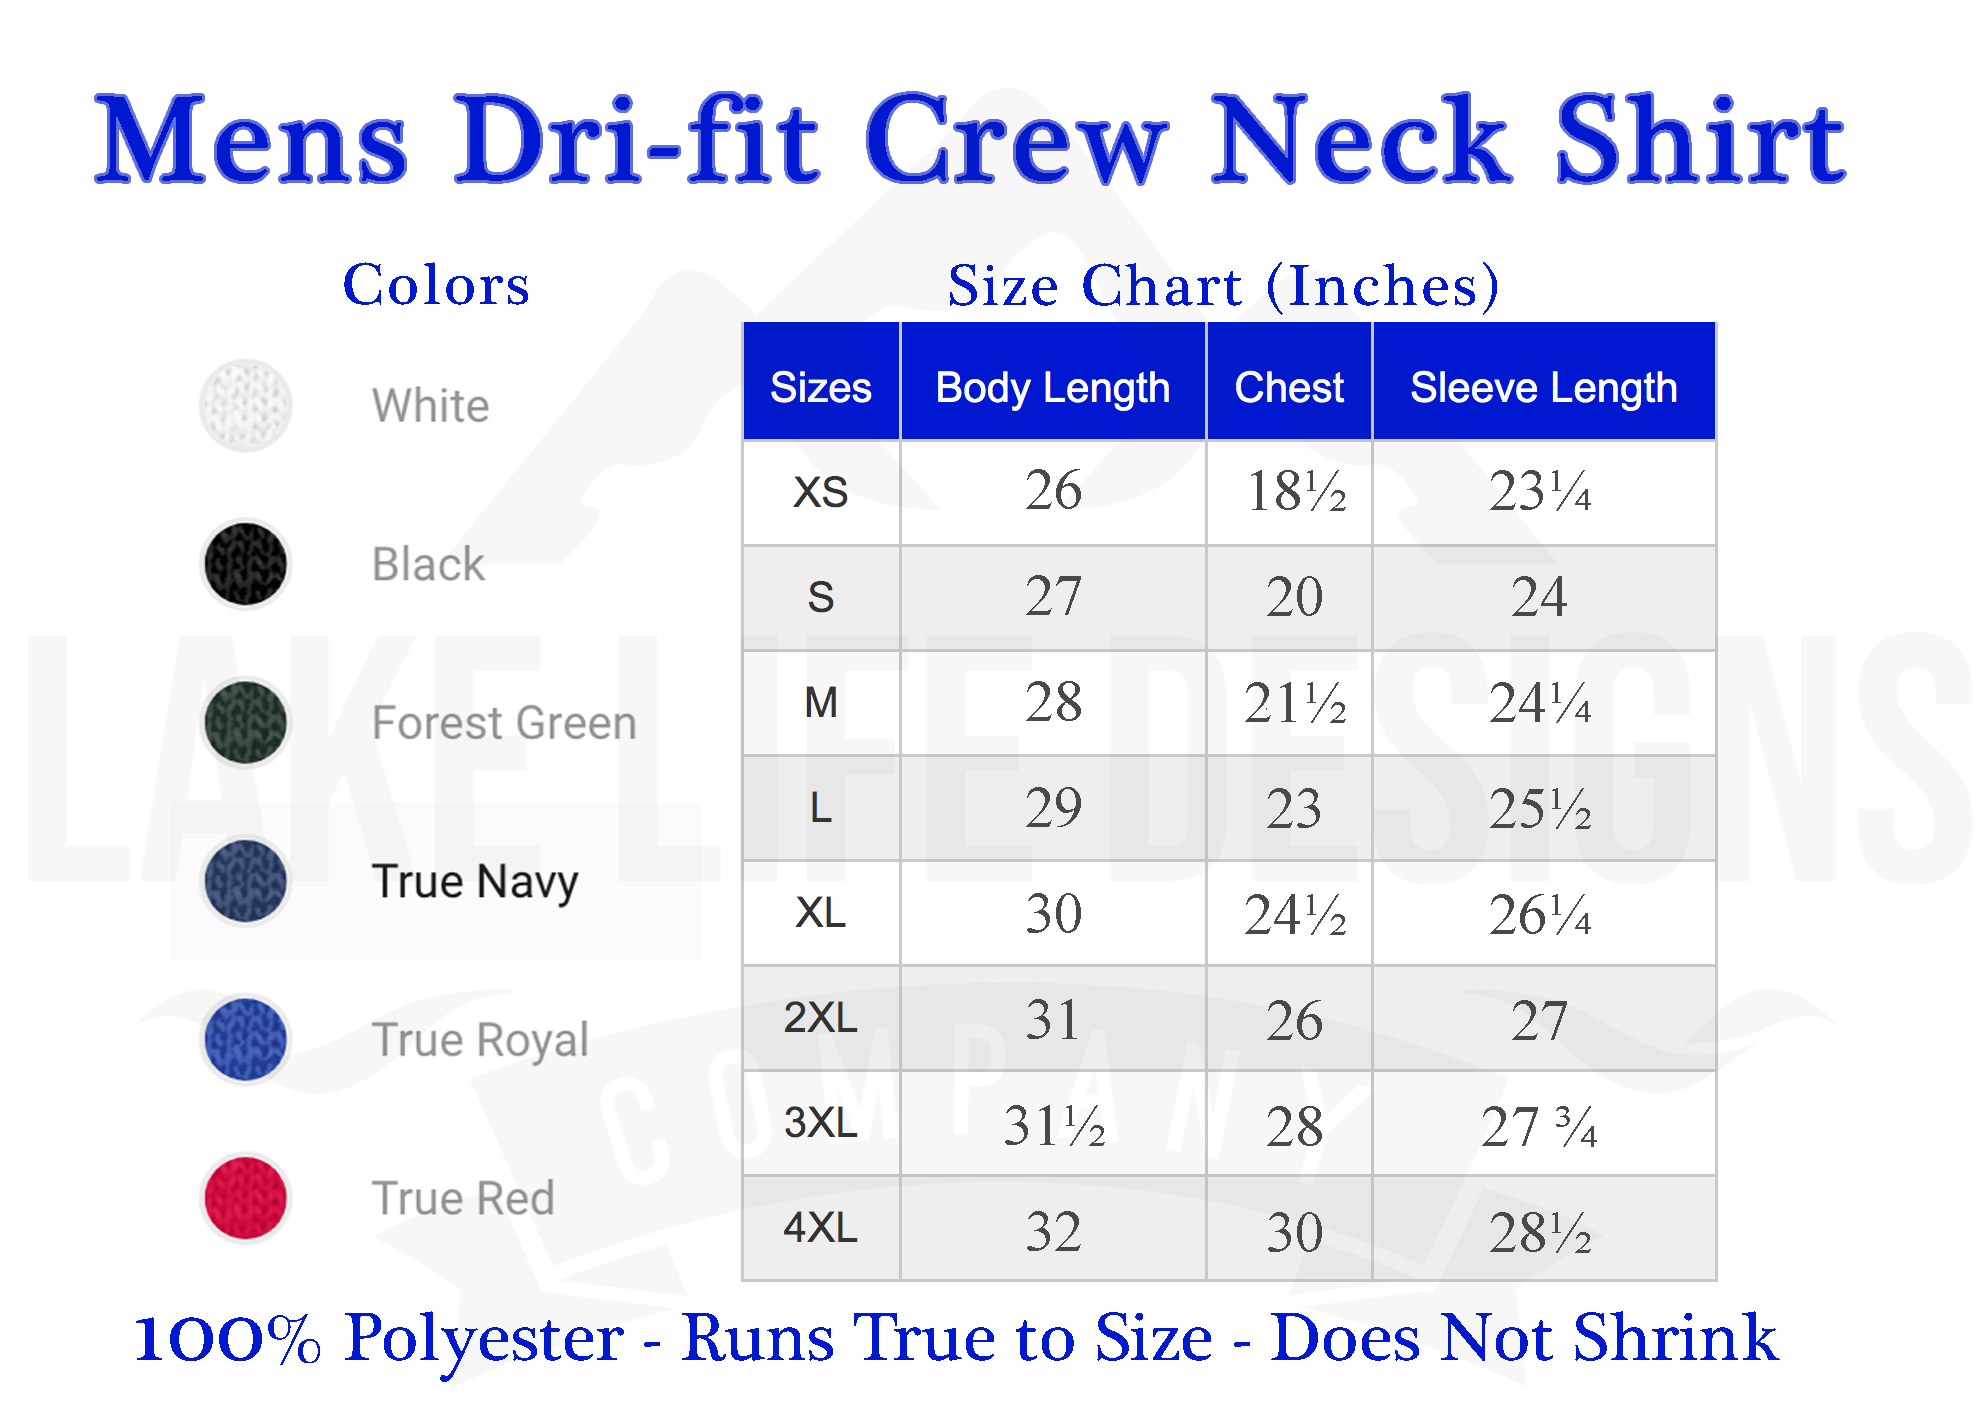 Indian Lake Life Dri-fit Boating Shirt - Breathable Material- Men's Long Sleeve Moisture Wicking Tee - Ohio Lake